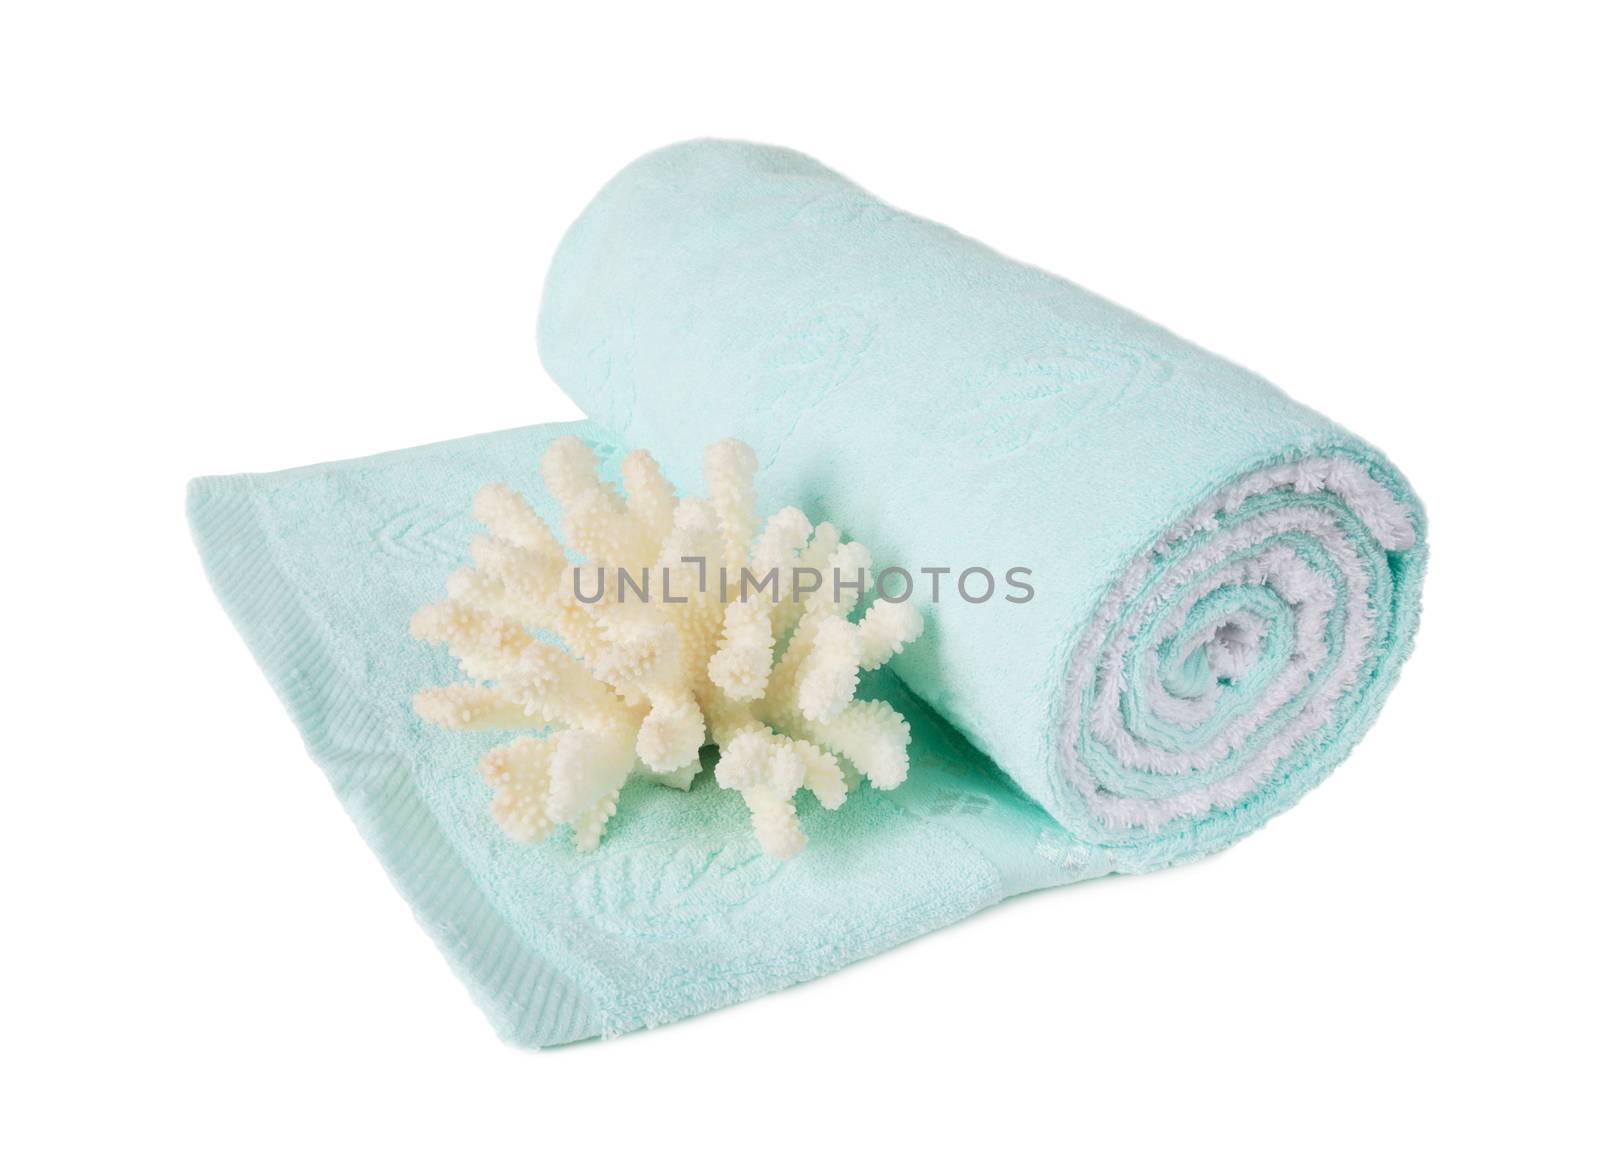 Towel and coral on white background by Epitavi